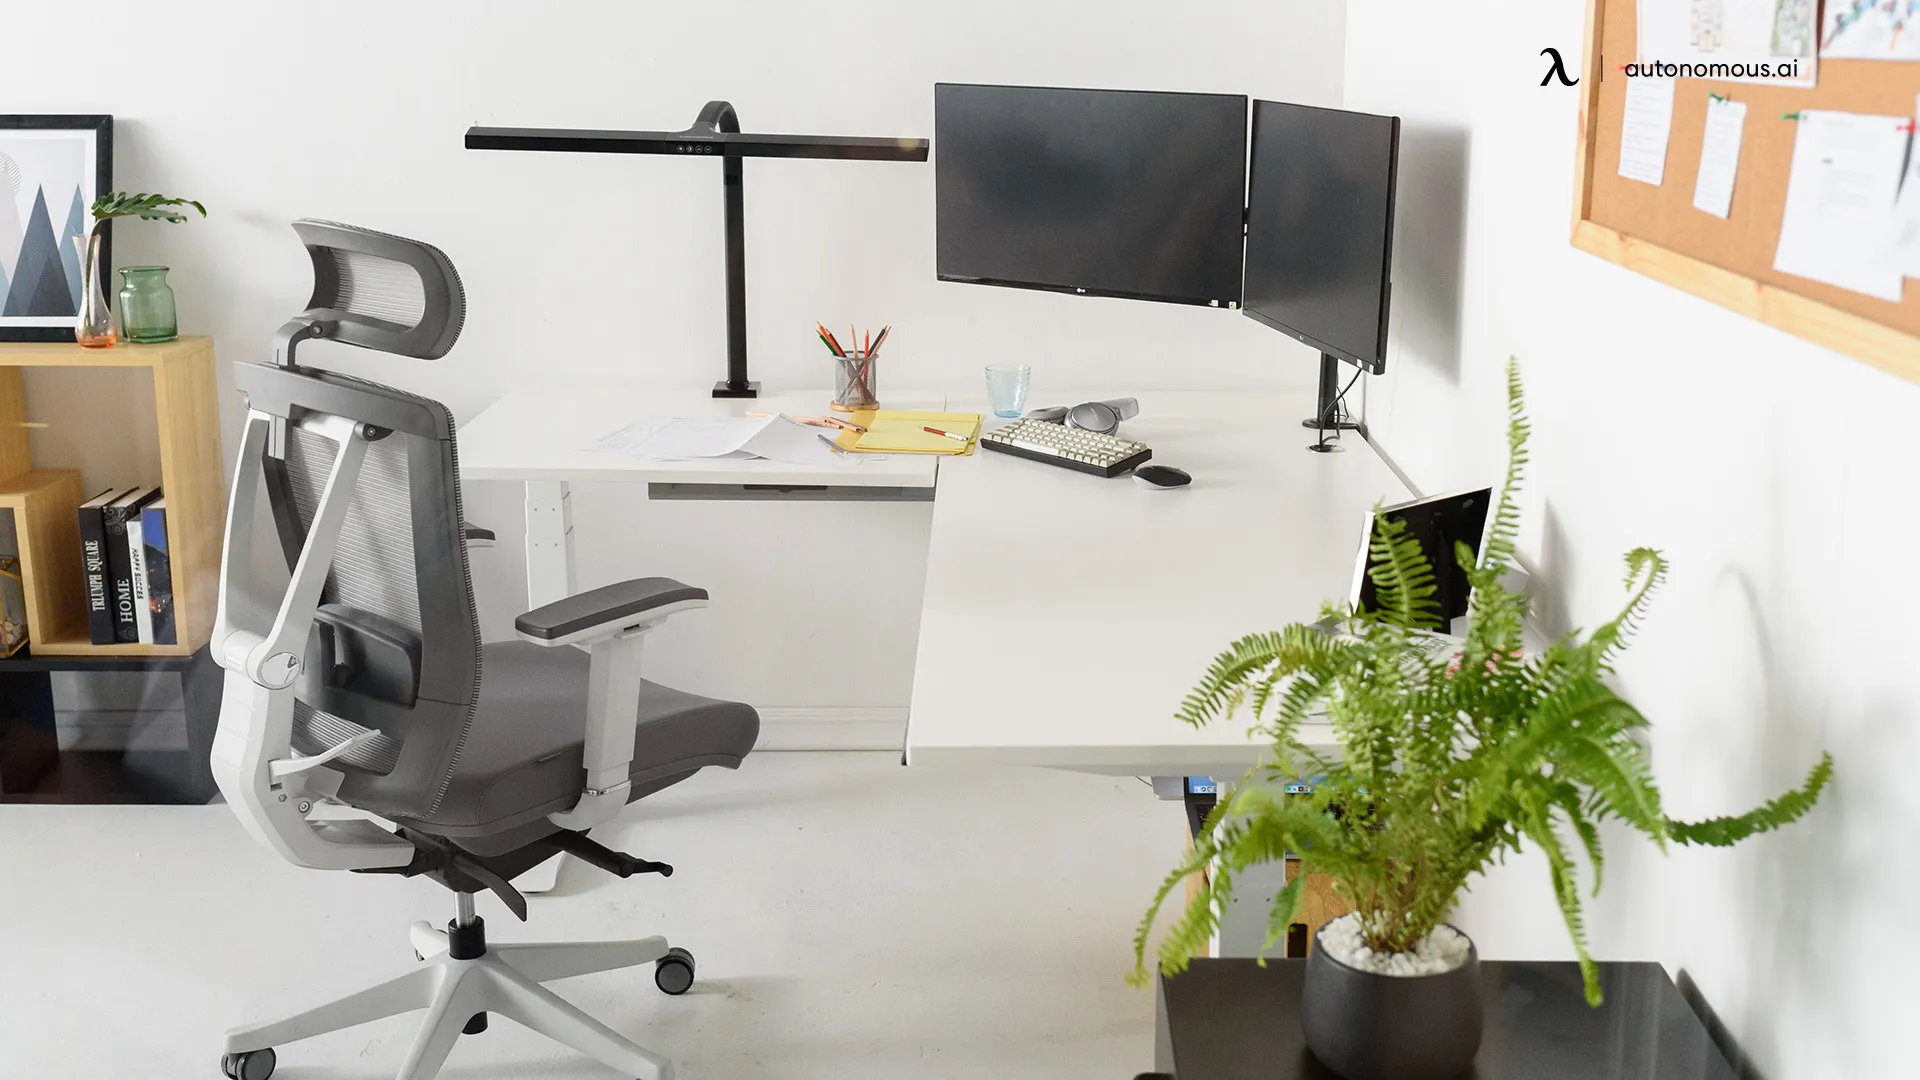 How to Sit Ergonomically on an L-shaped Desk?